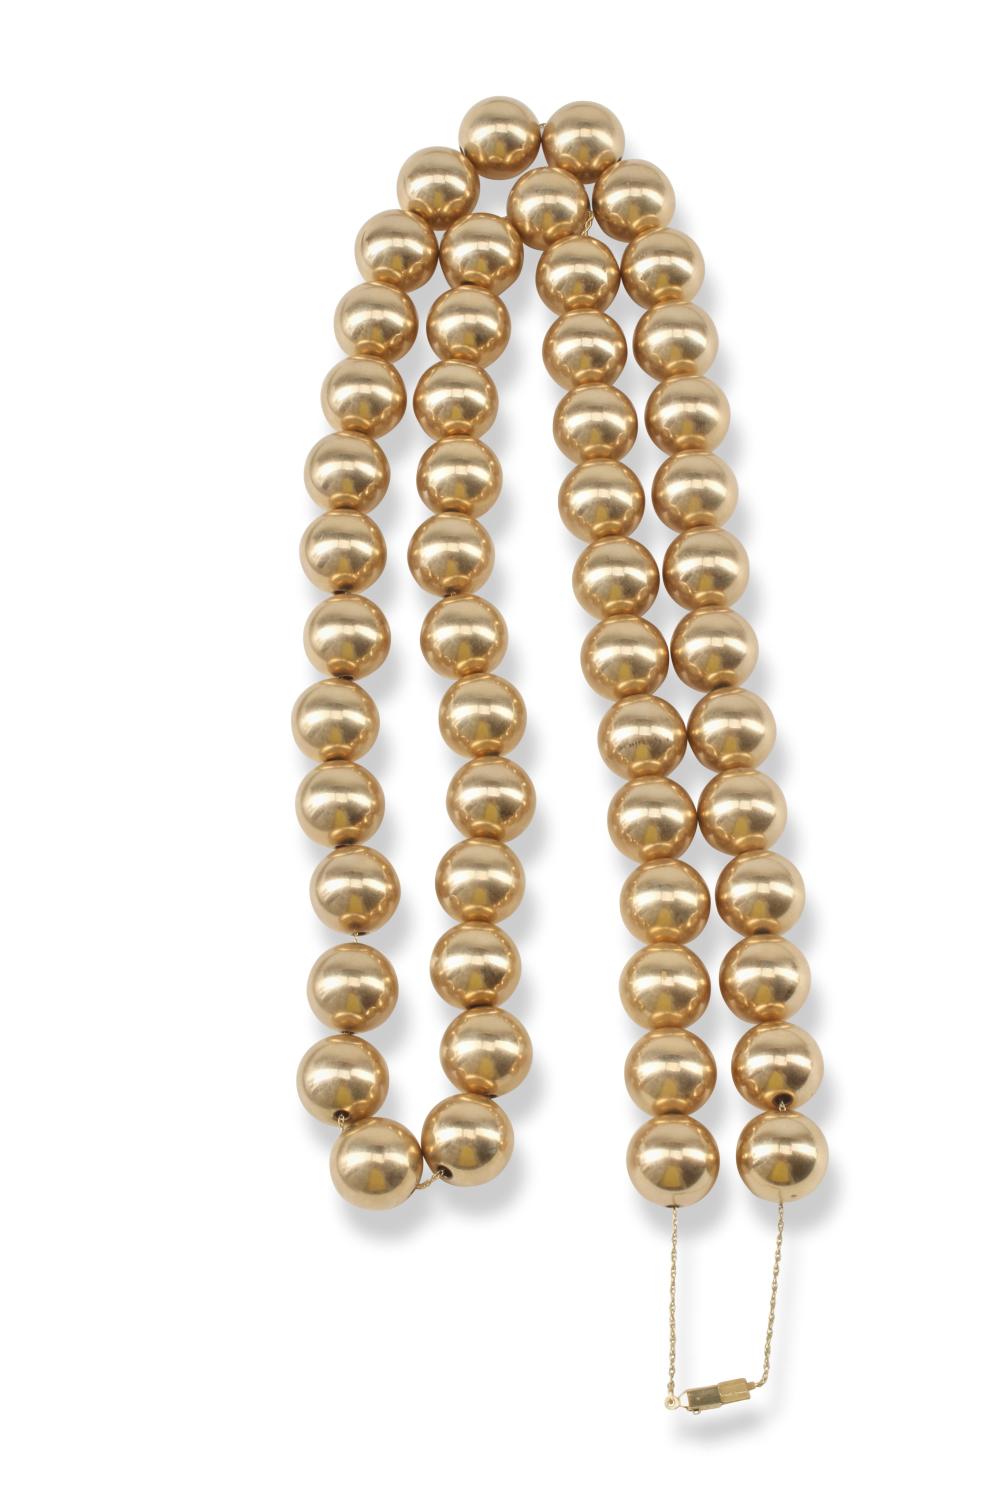 A GOLD BEAD NECKLACEA gold bead 34364f